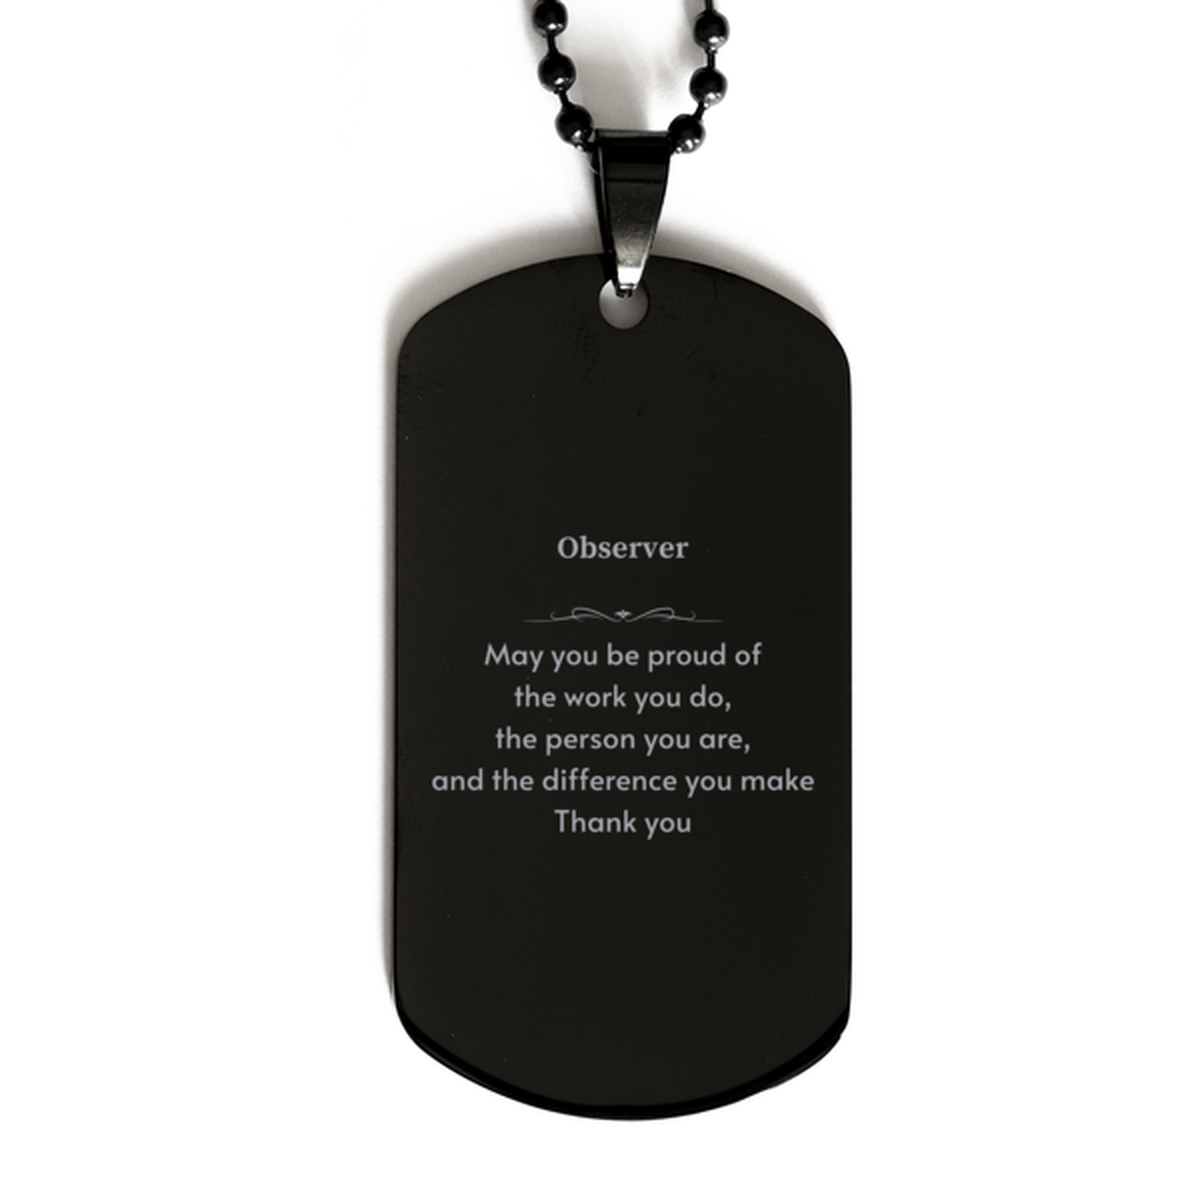 Heartwarming Black Dog Tag Retirement Coworkers Gifts for Observer, Observer May You be proud of the work you do, the person you are Gifts for Boss Men Women Friends